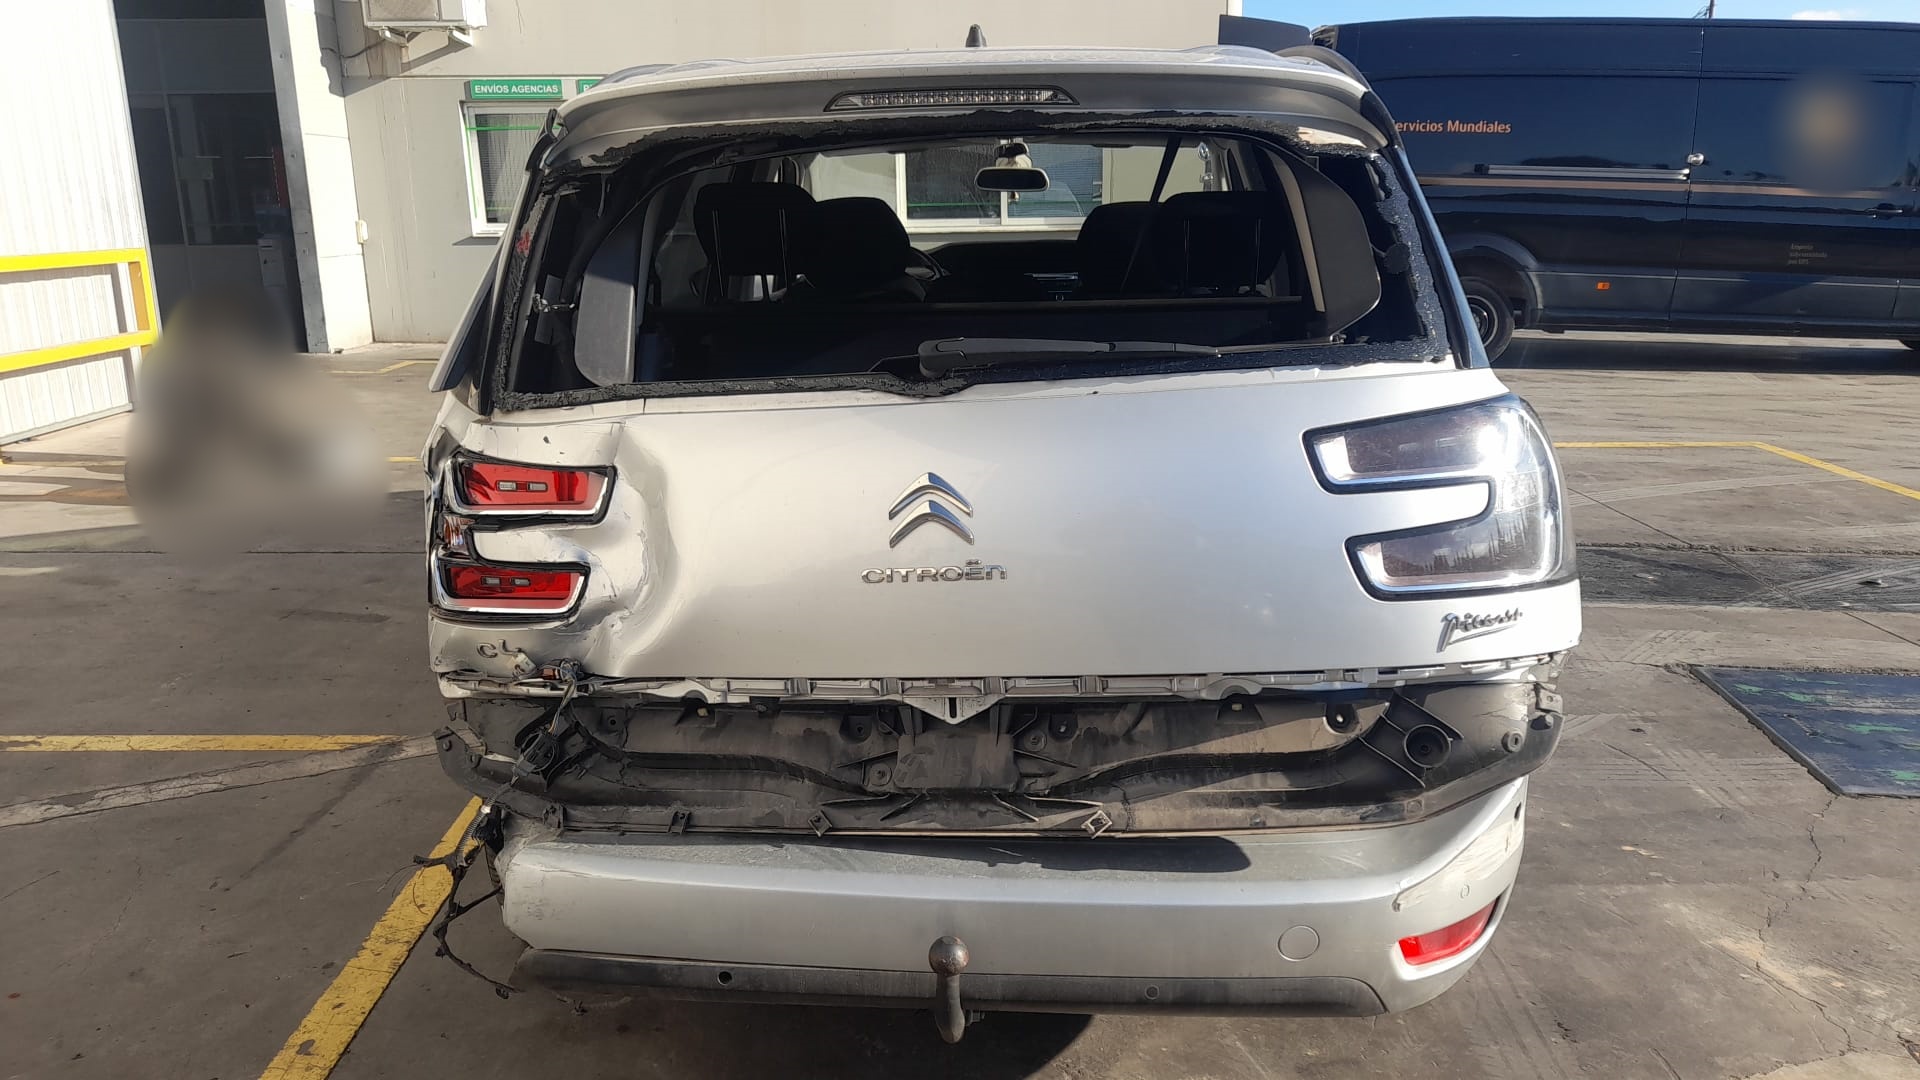 CITROËN C4 Picasso 2 generation (2013-2018) Other Body Parts 9674829780, 9674829780 24025516